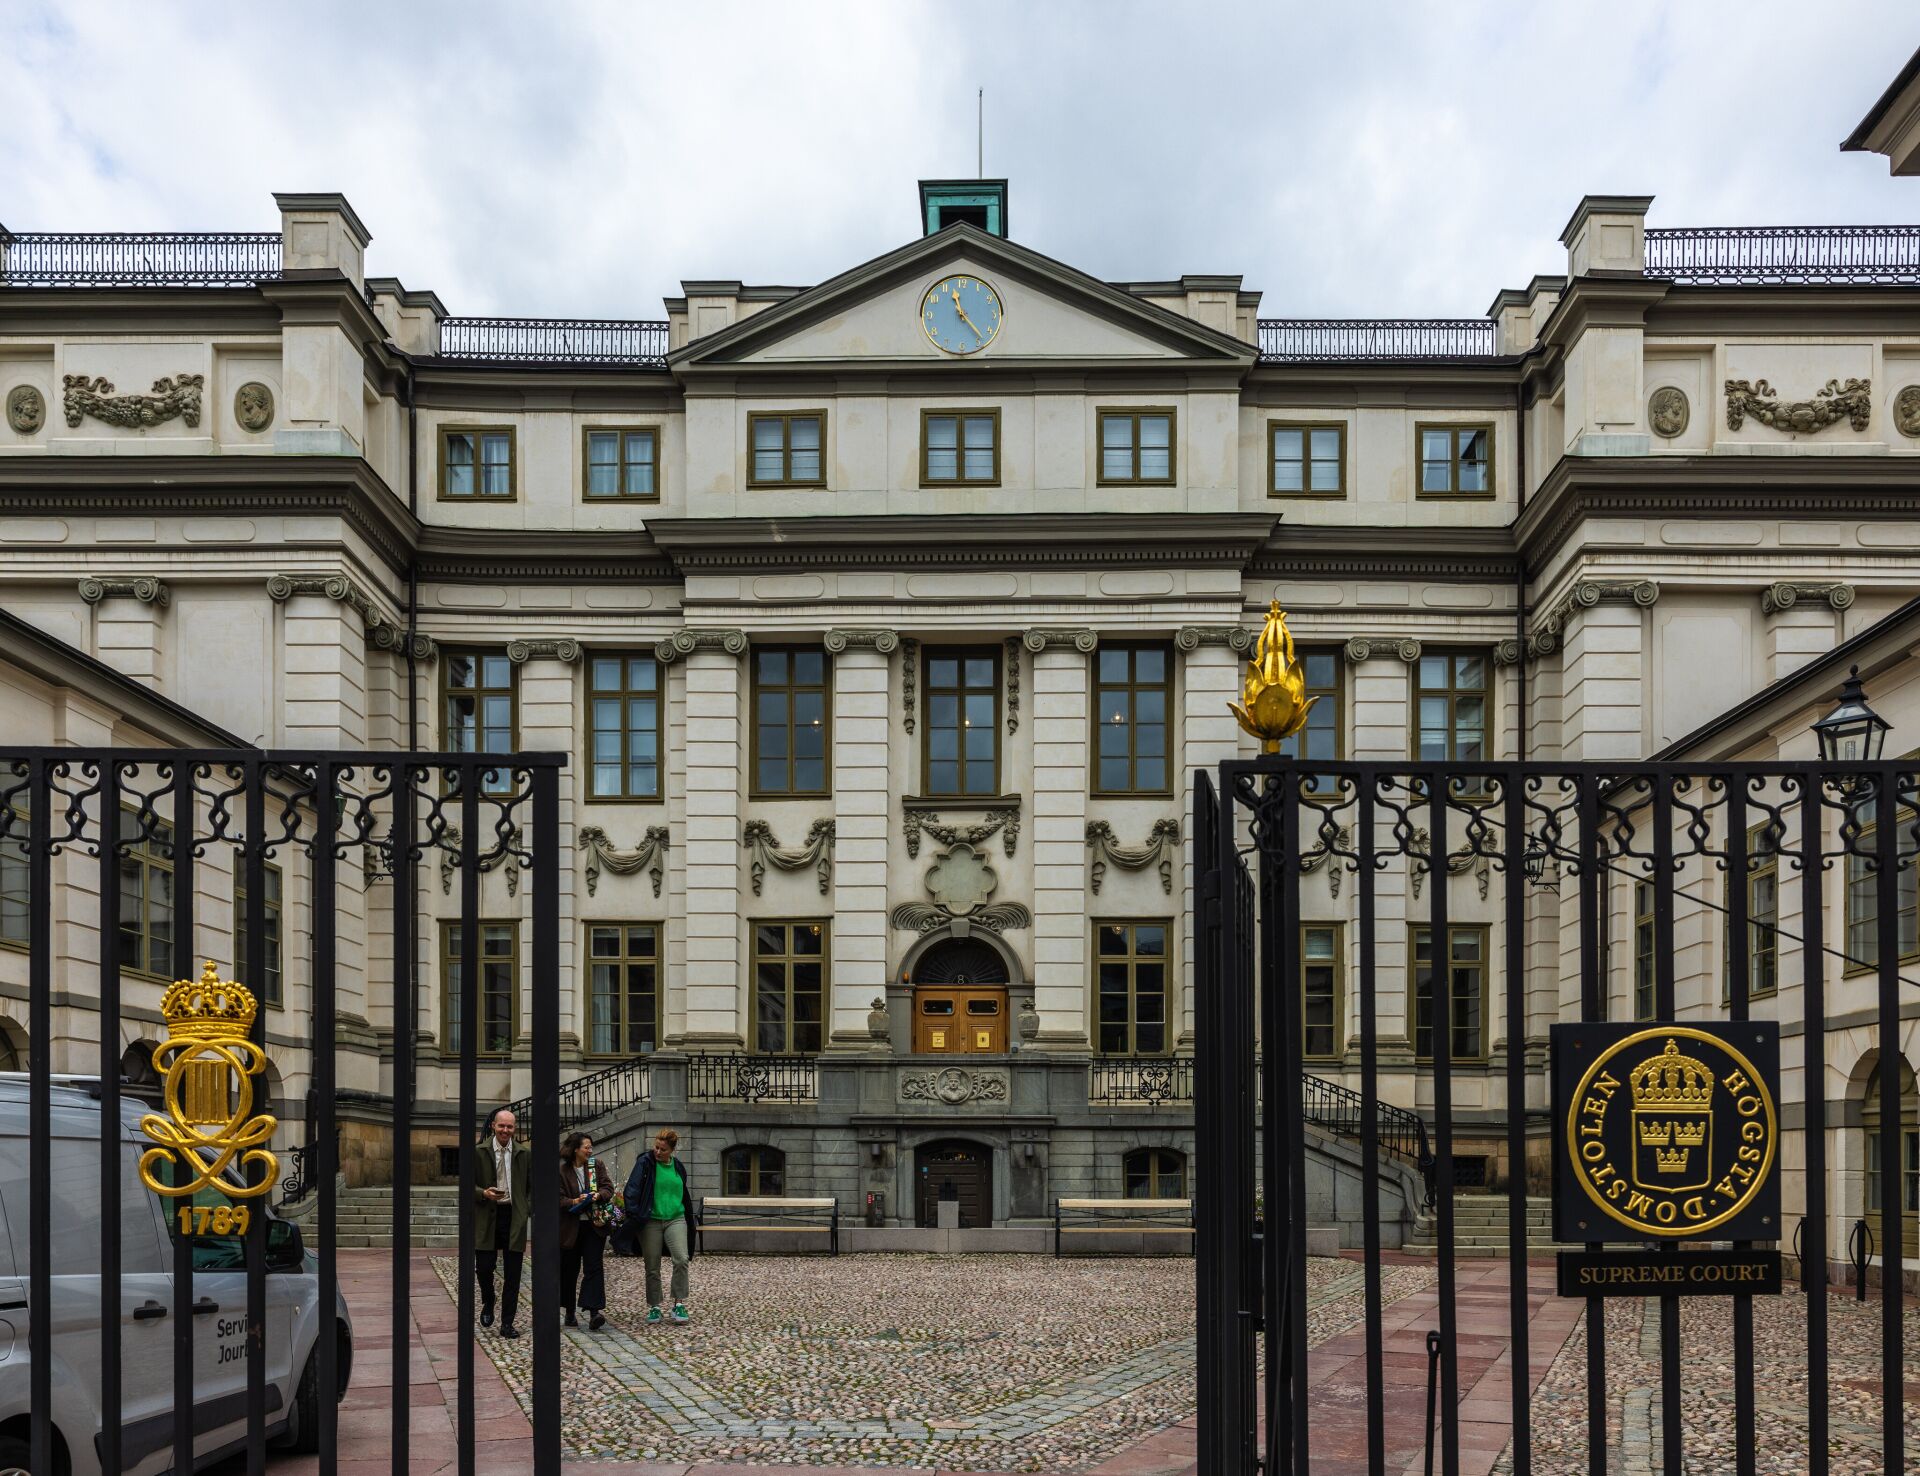 The Supreme Court in Sweden